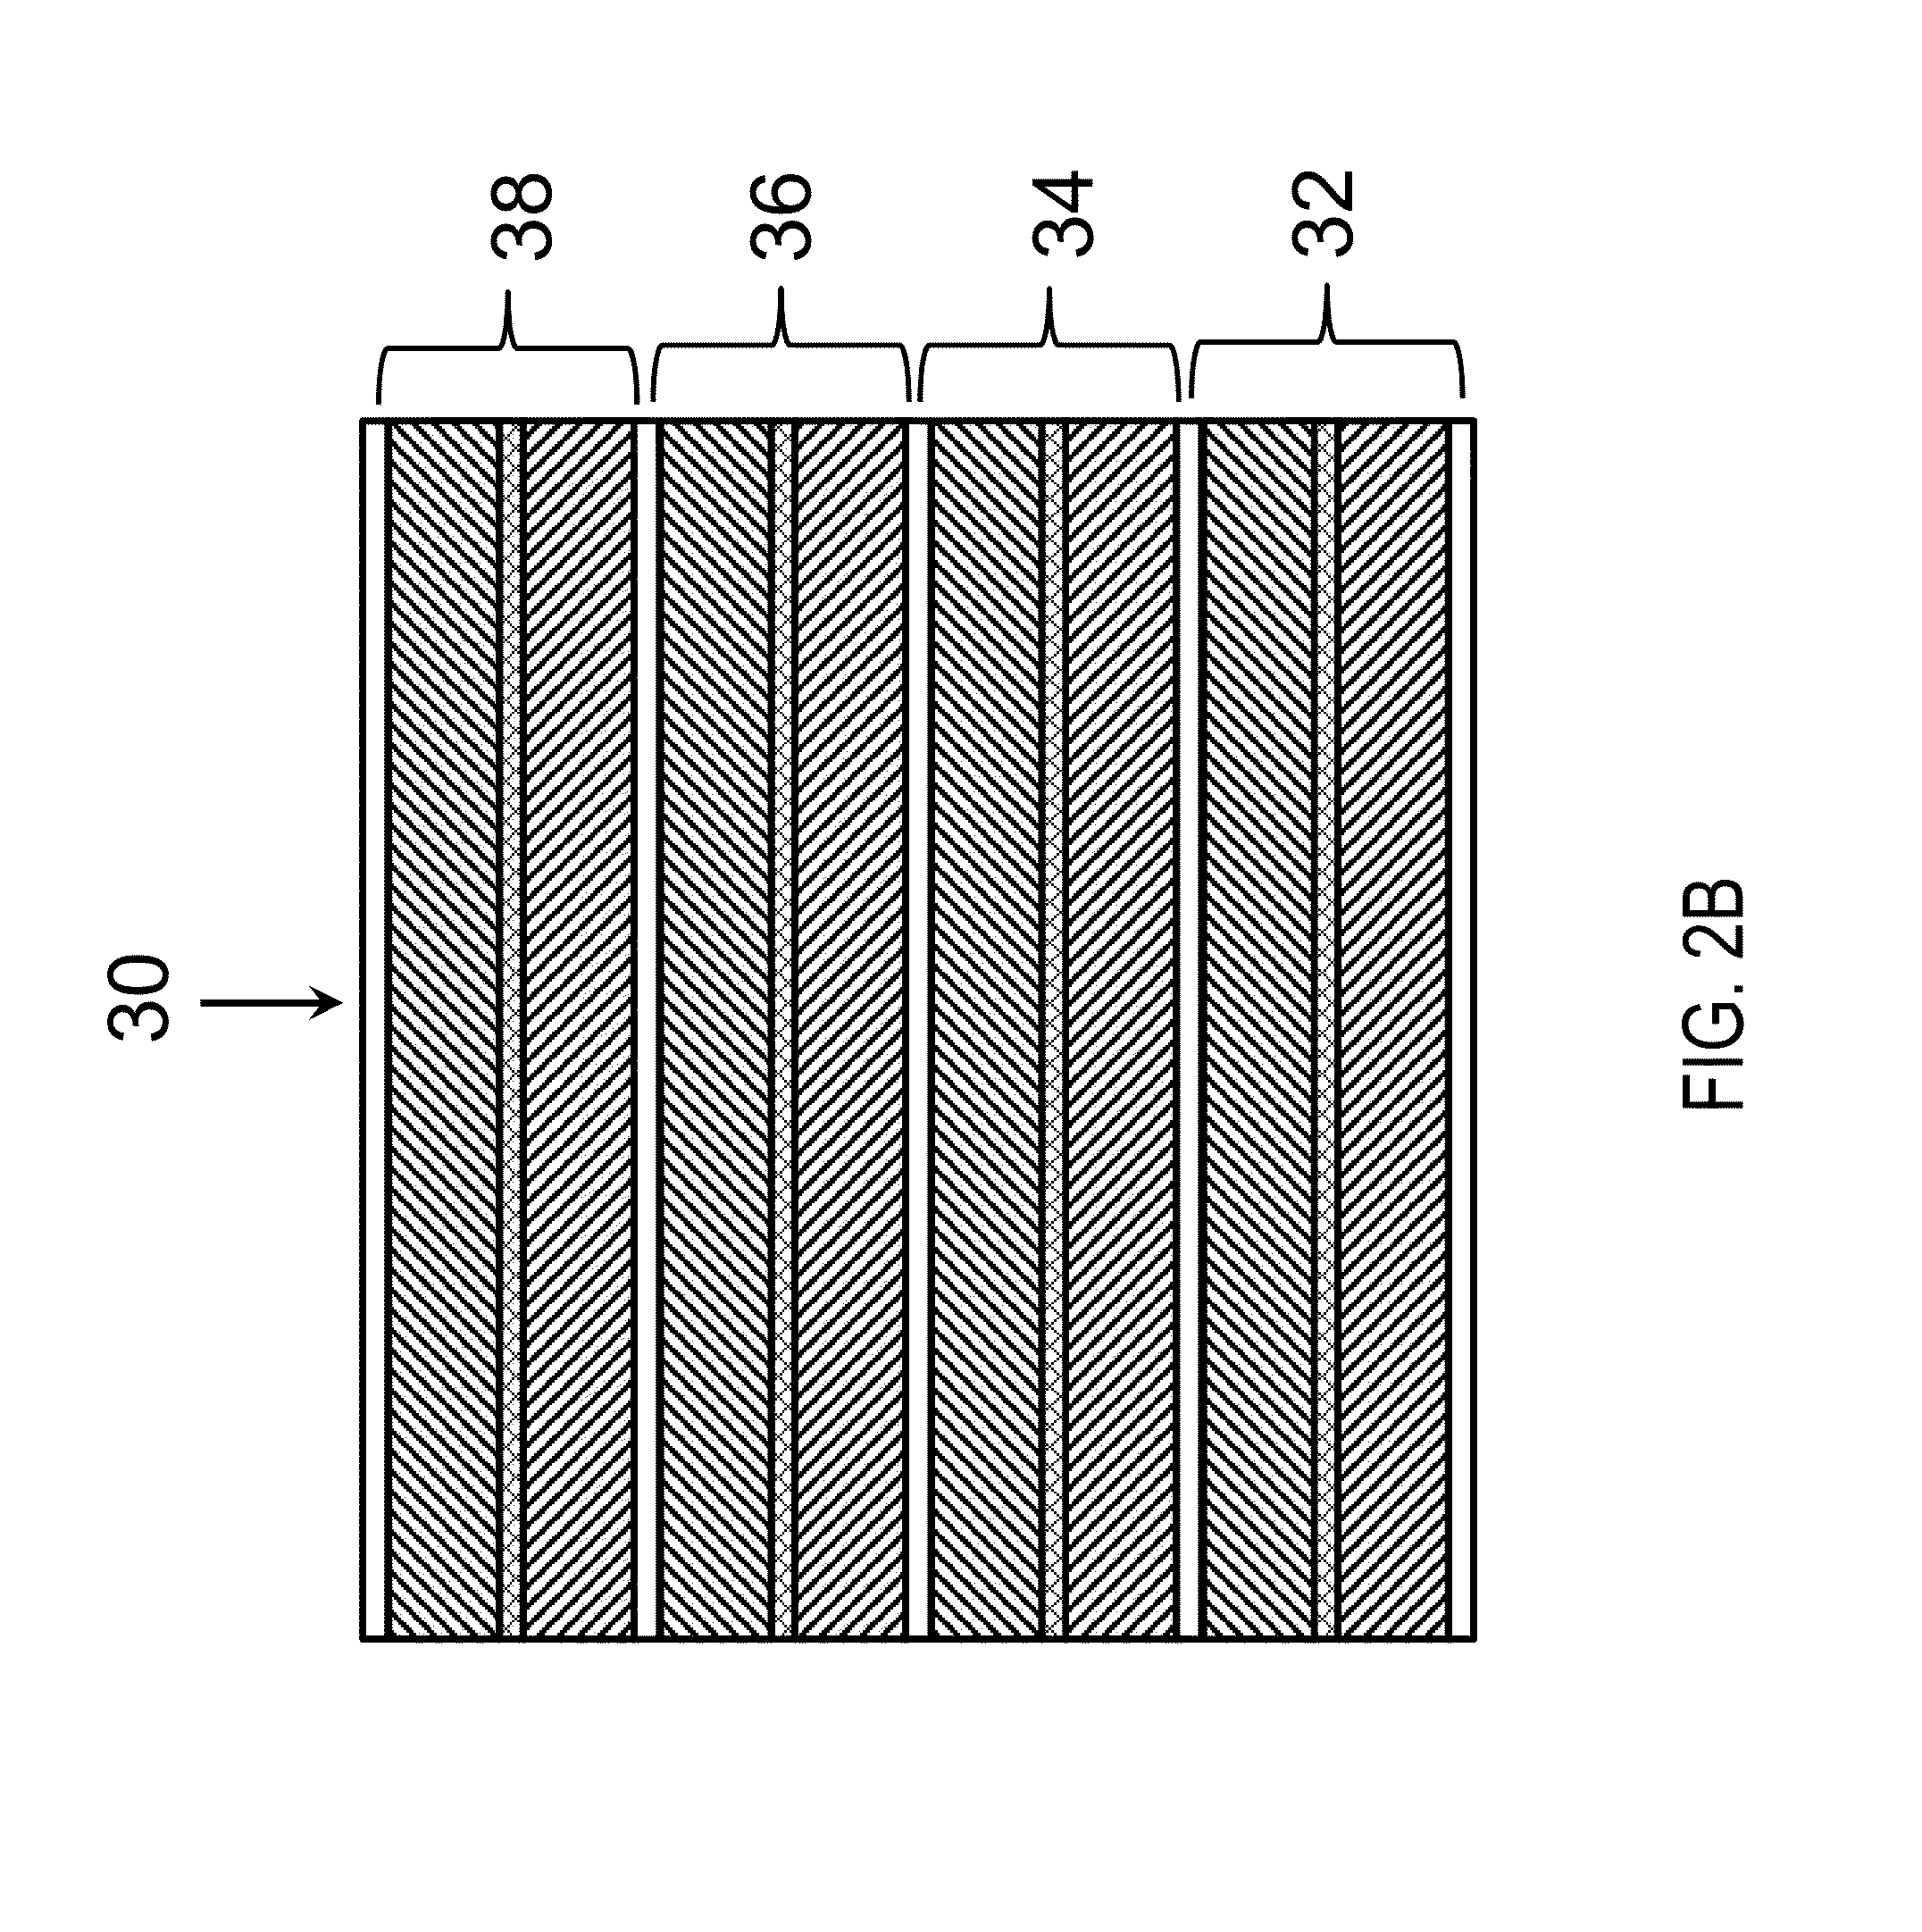 Electrolyte compositions and electrochemical double layer capacitors formed there from